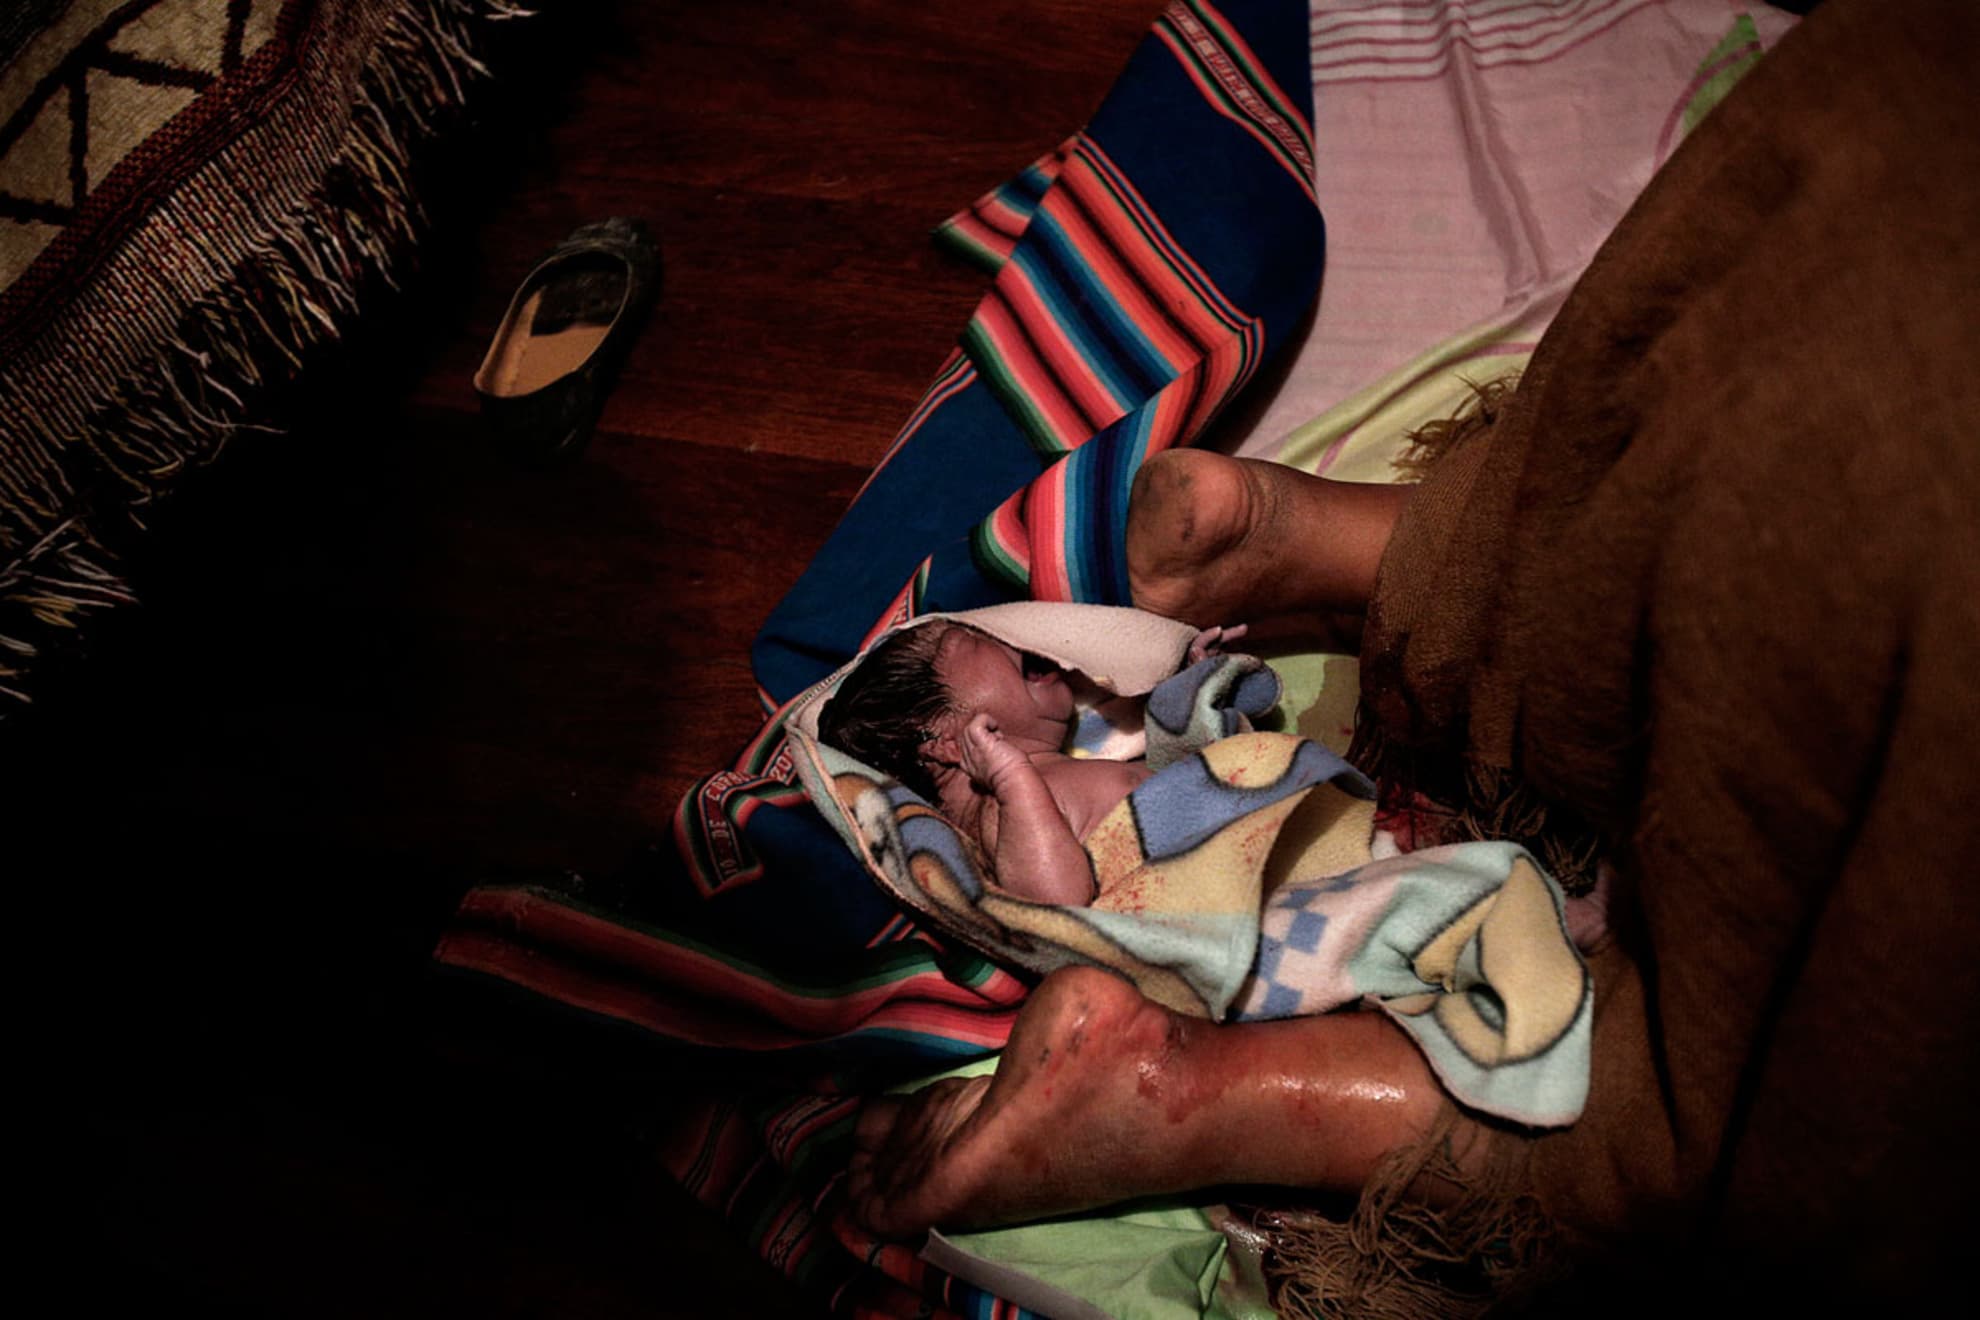 The baby of Lidia Mamani Lima, 40 years old, born in the cultural adaptation room of the Patacamaya hospital,